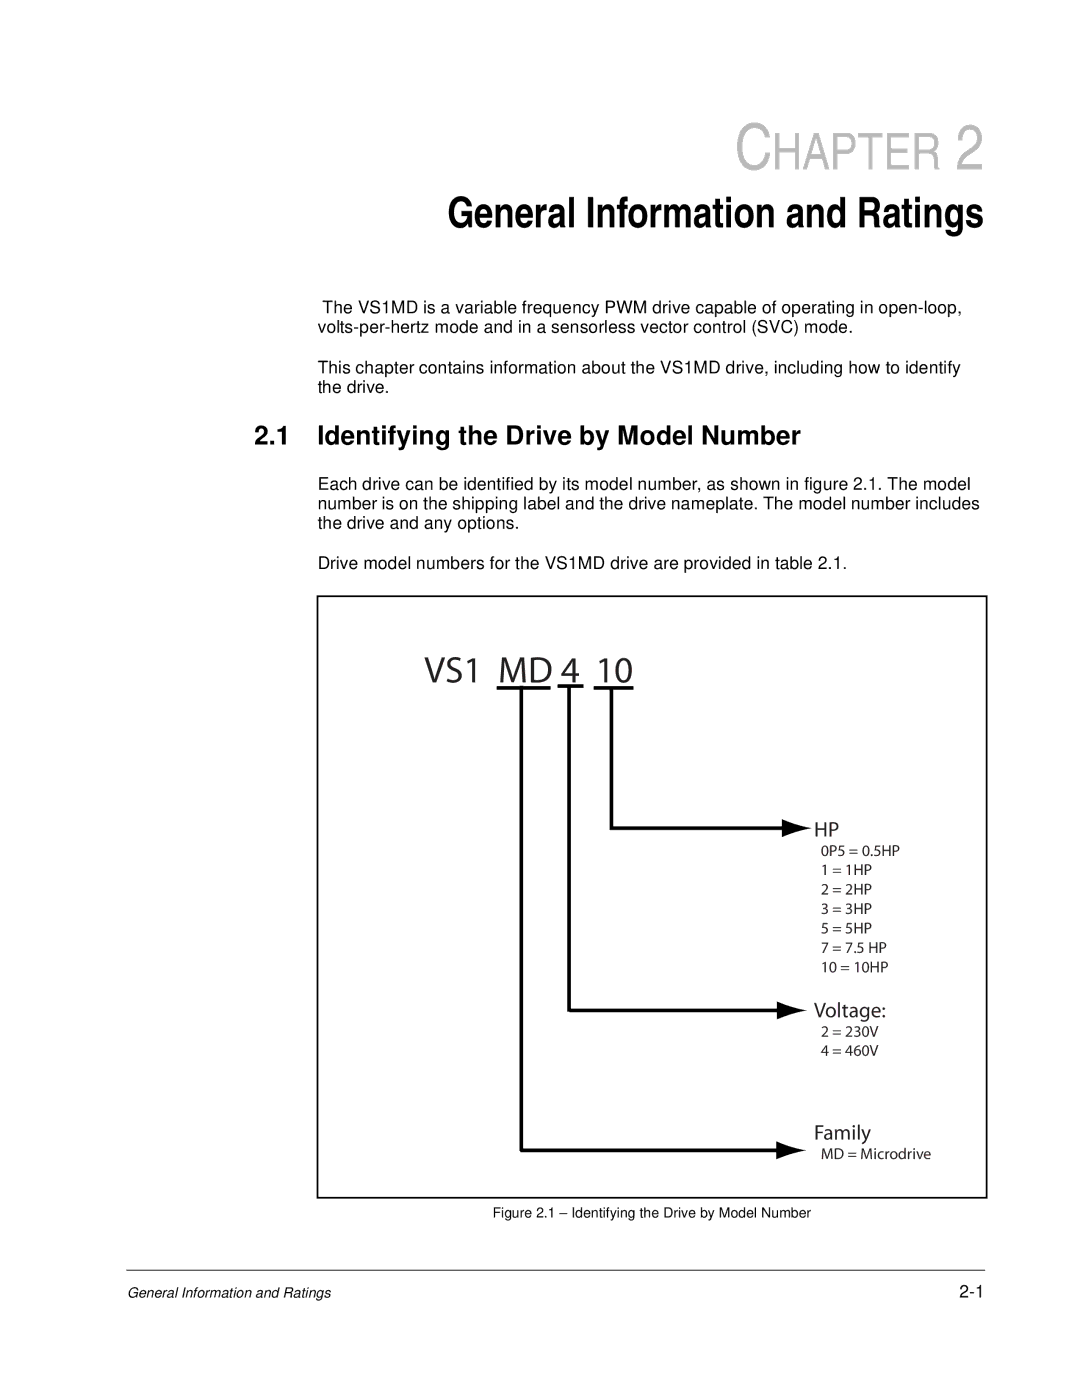 Baldor VS1MD instruction manual General Information and Ratings, Identifying the Drive by Model Number 